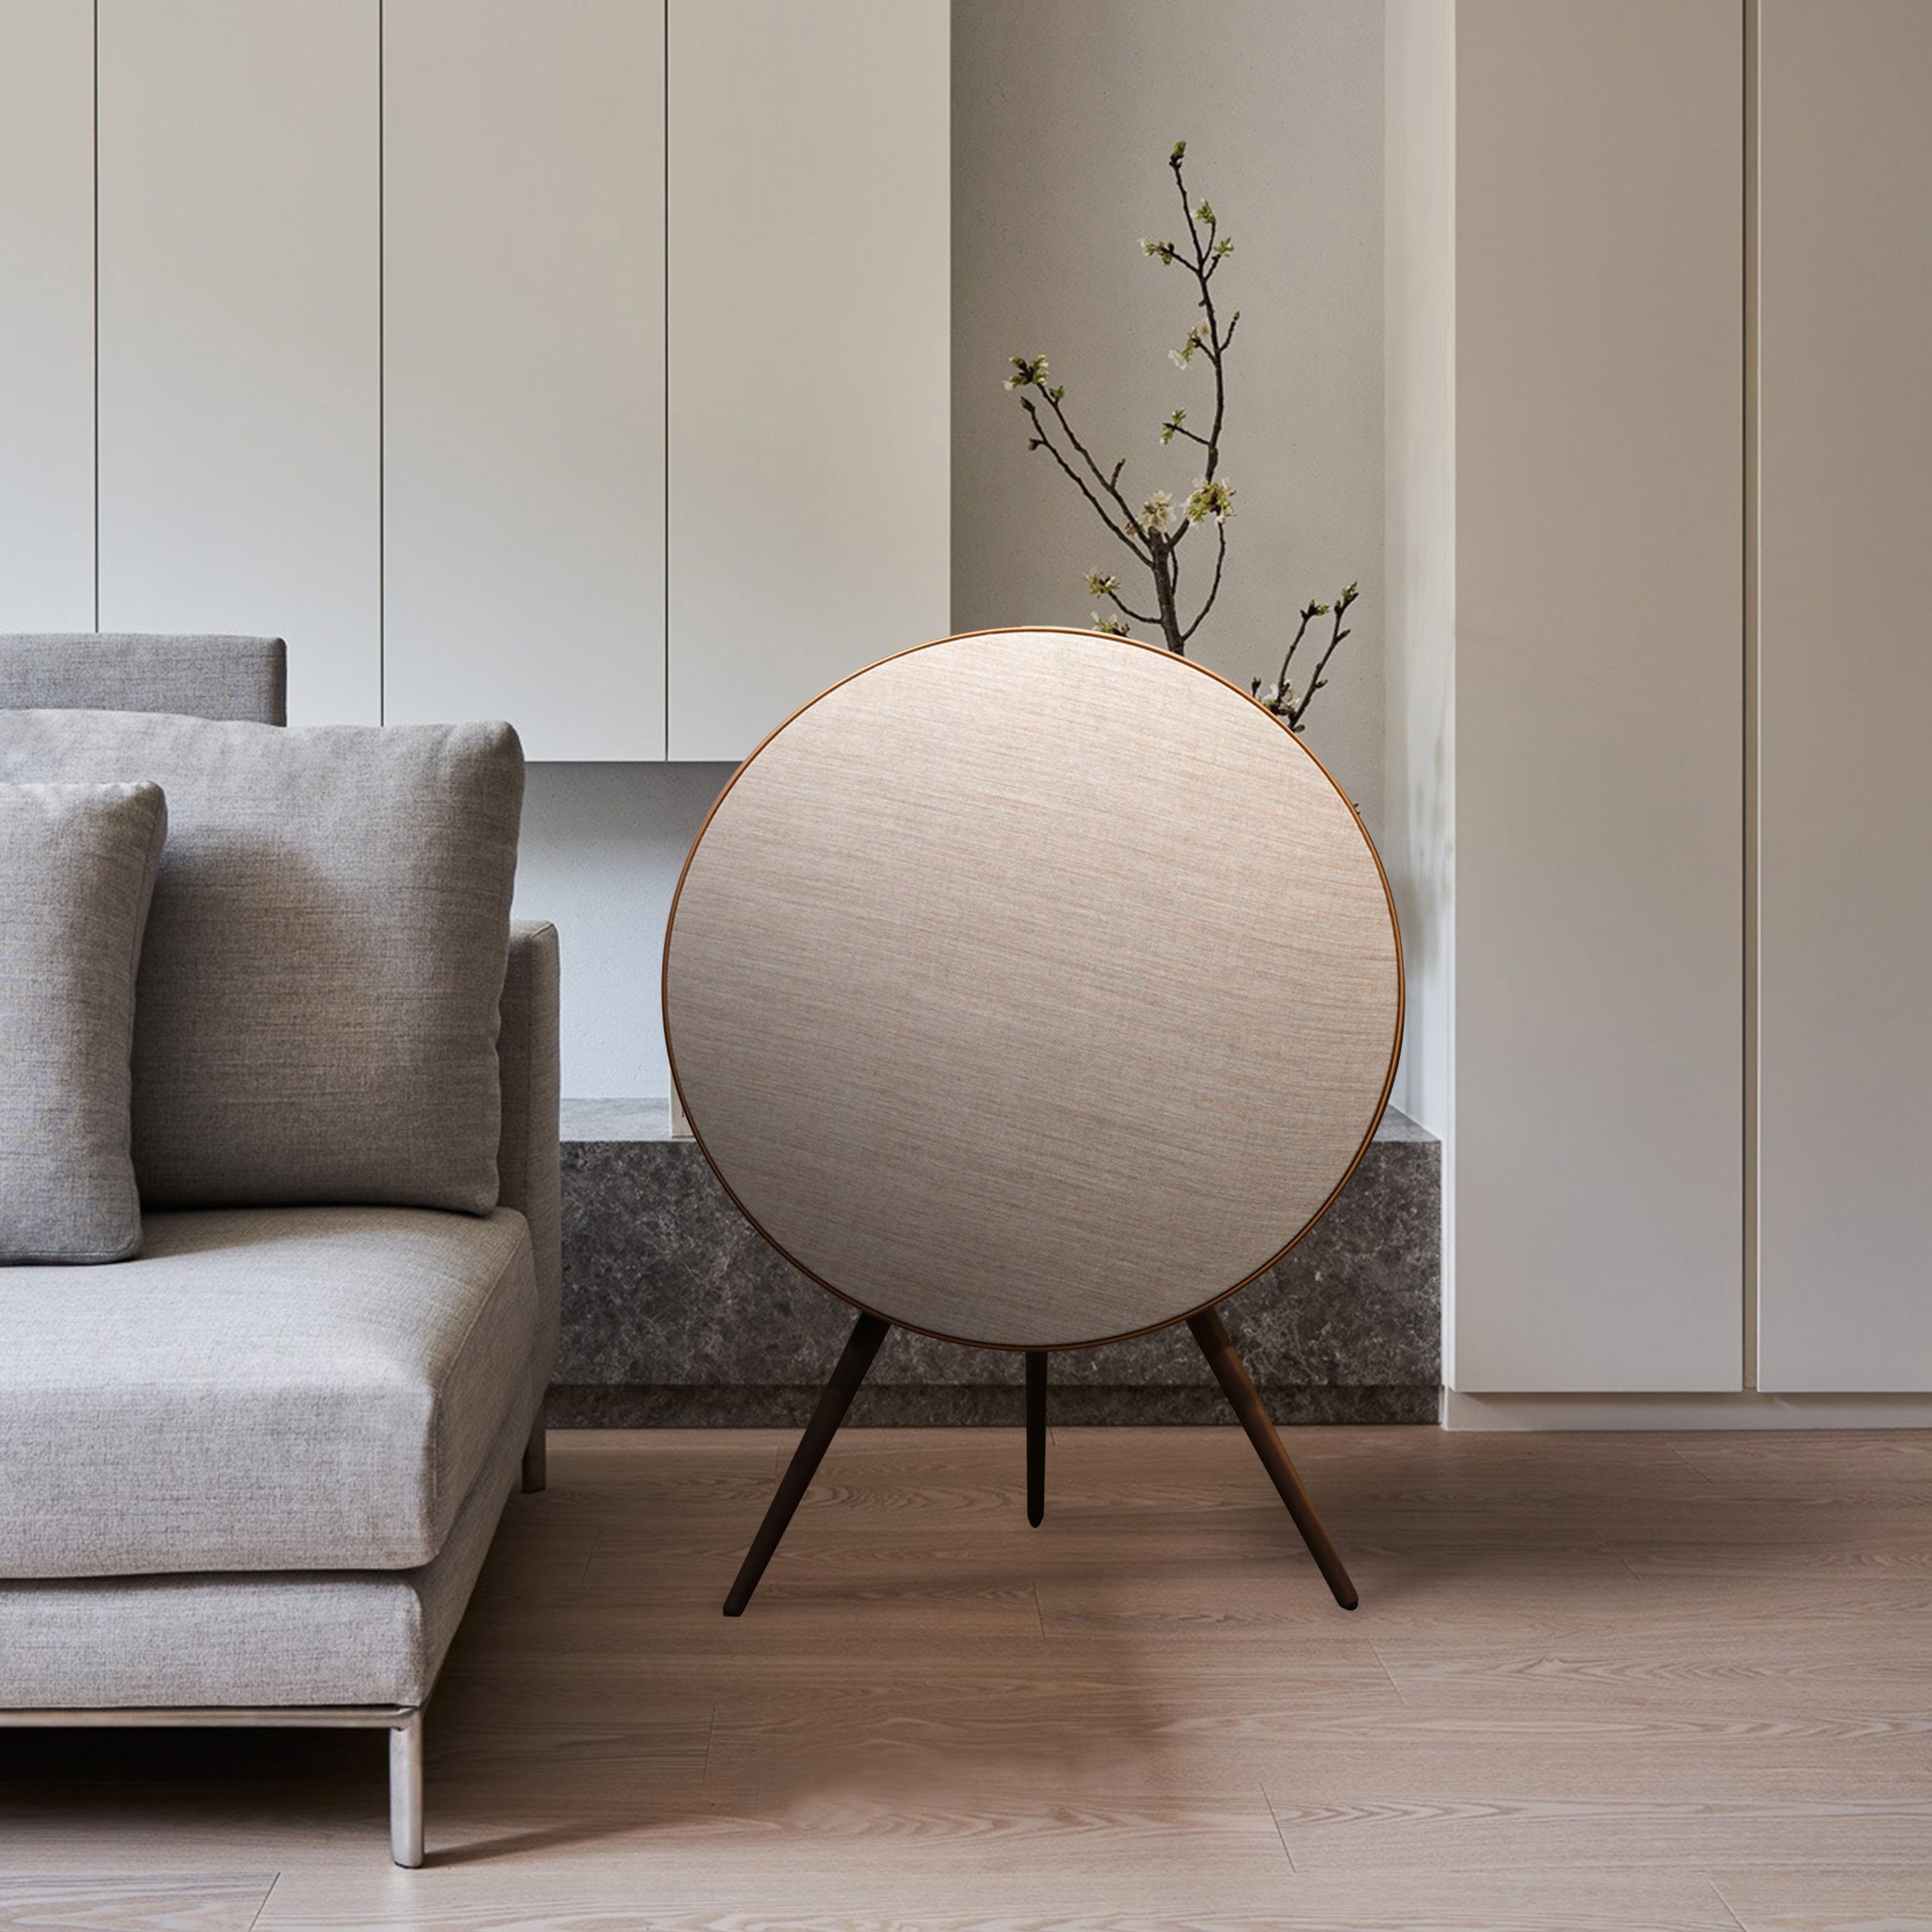 Beoplay A9 – POWERVINA